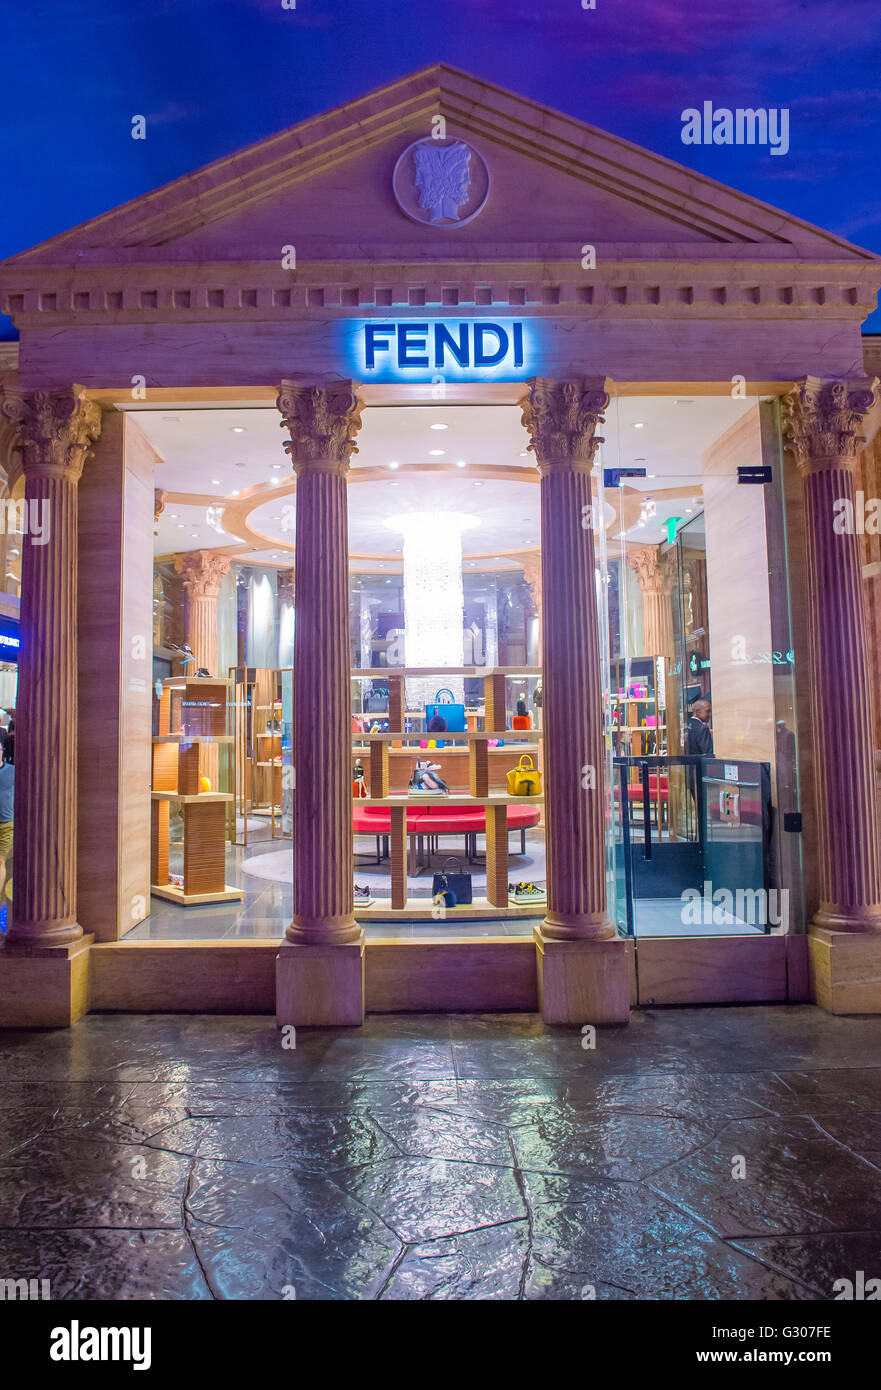 Exterior of a Fendi store in Caesars Palace hotel in Las Vegas Stock ...